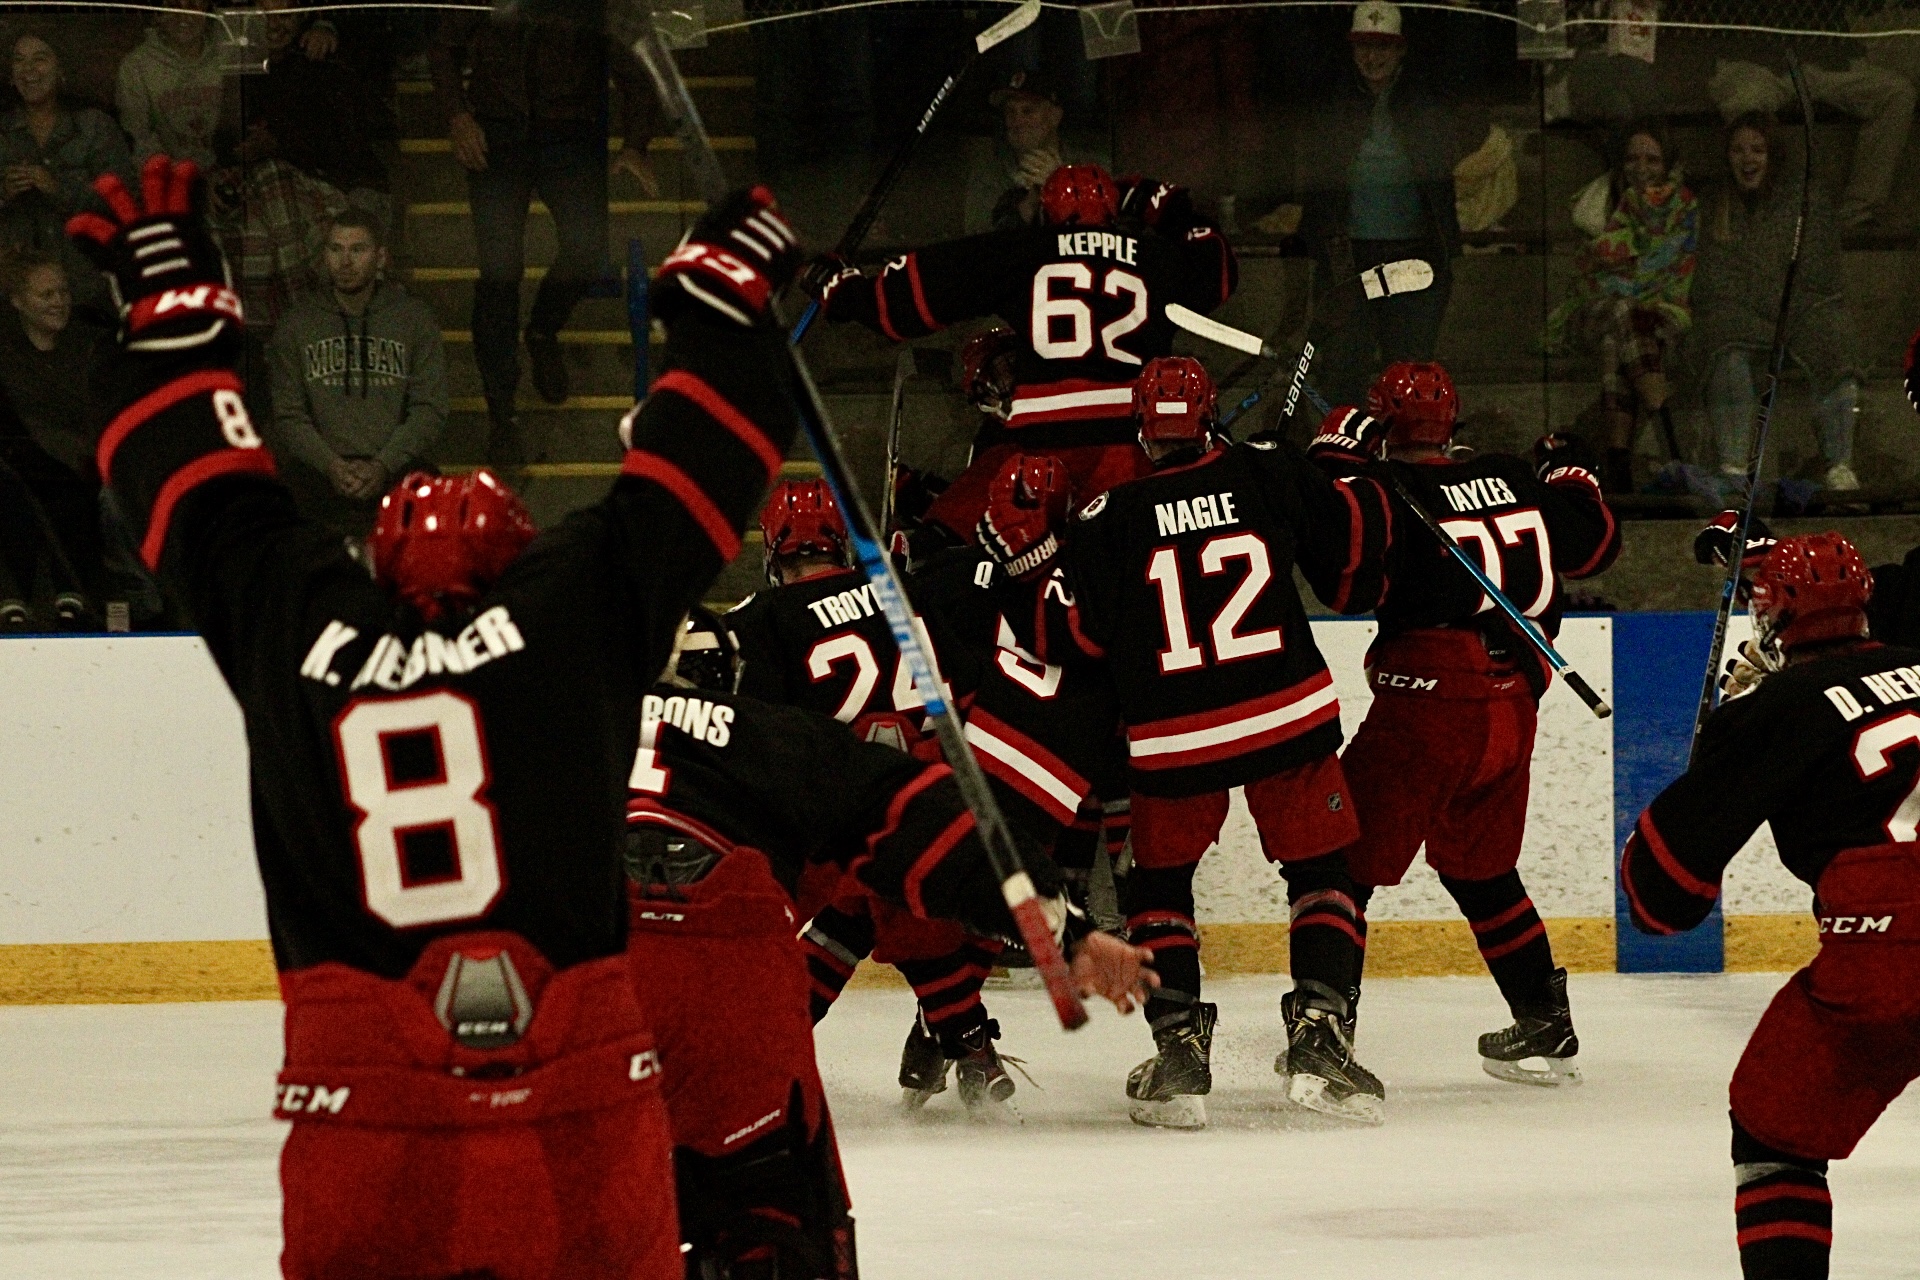 Cardinals defeat Stallions in dramatic fashion